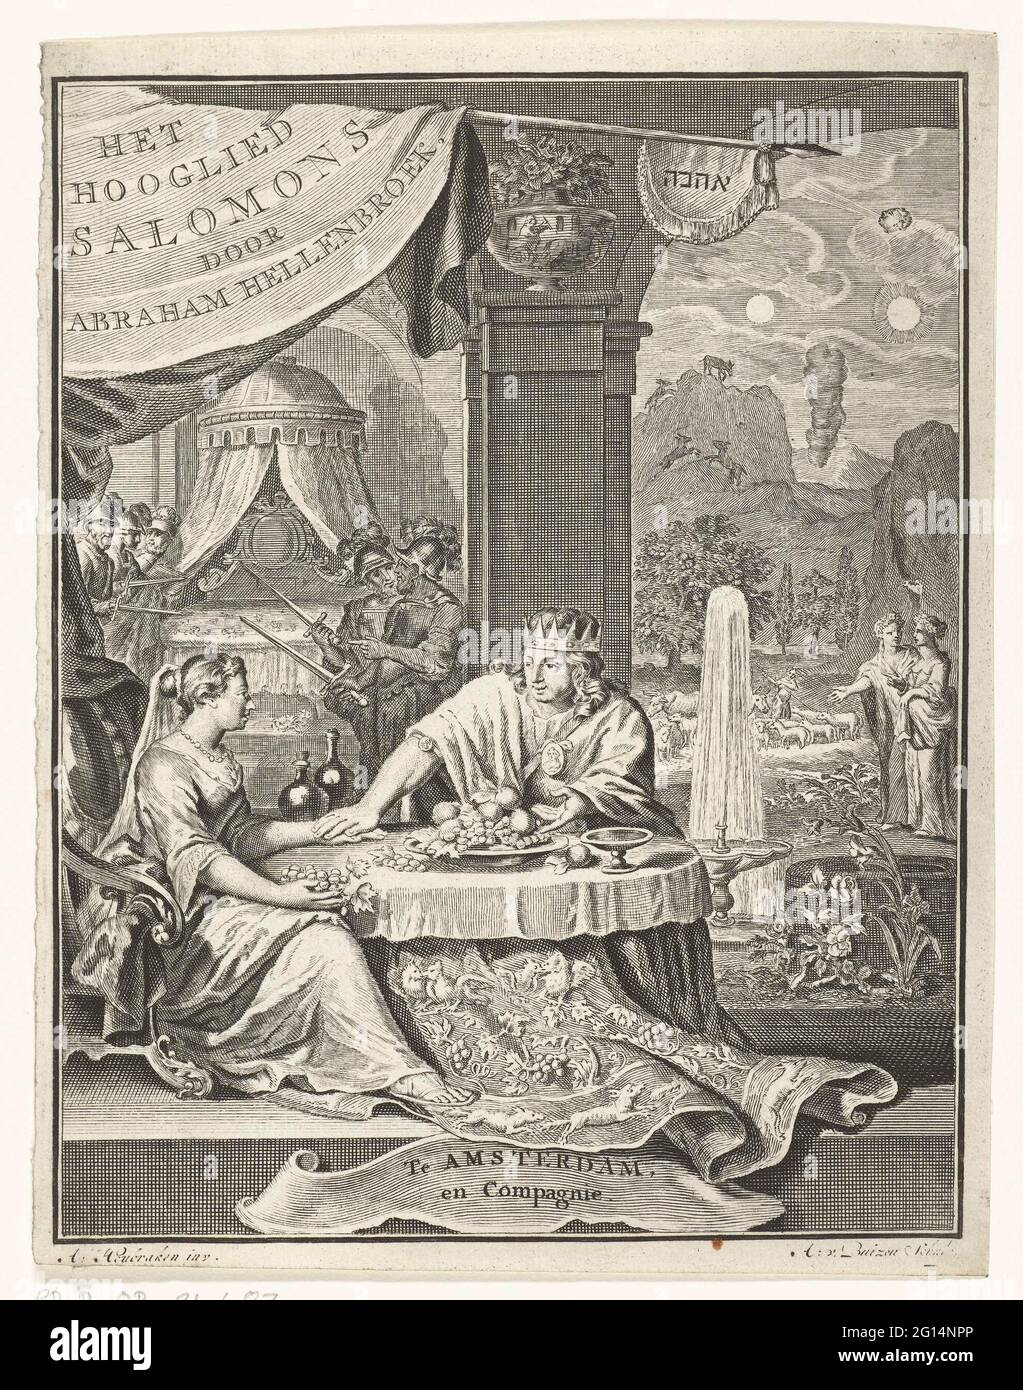 Solomon at the table with a loved one; Title page for: Abraham Hellenbroek,  the Hooglied Salomons, Amsterdam: 1737 .. Salomon is in his palace at the  table with a woman from his